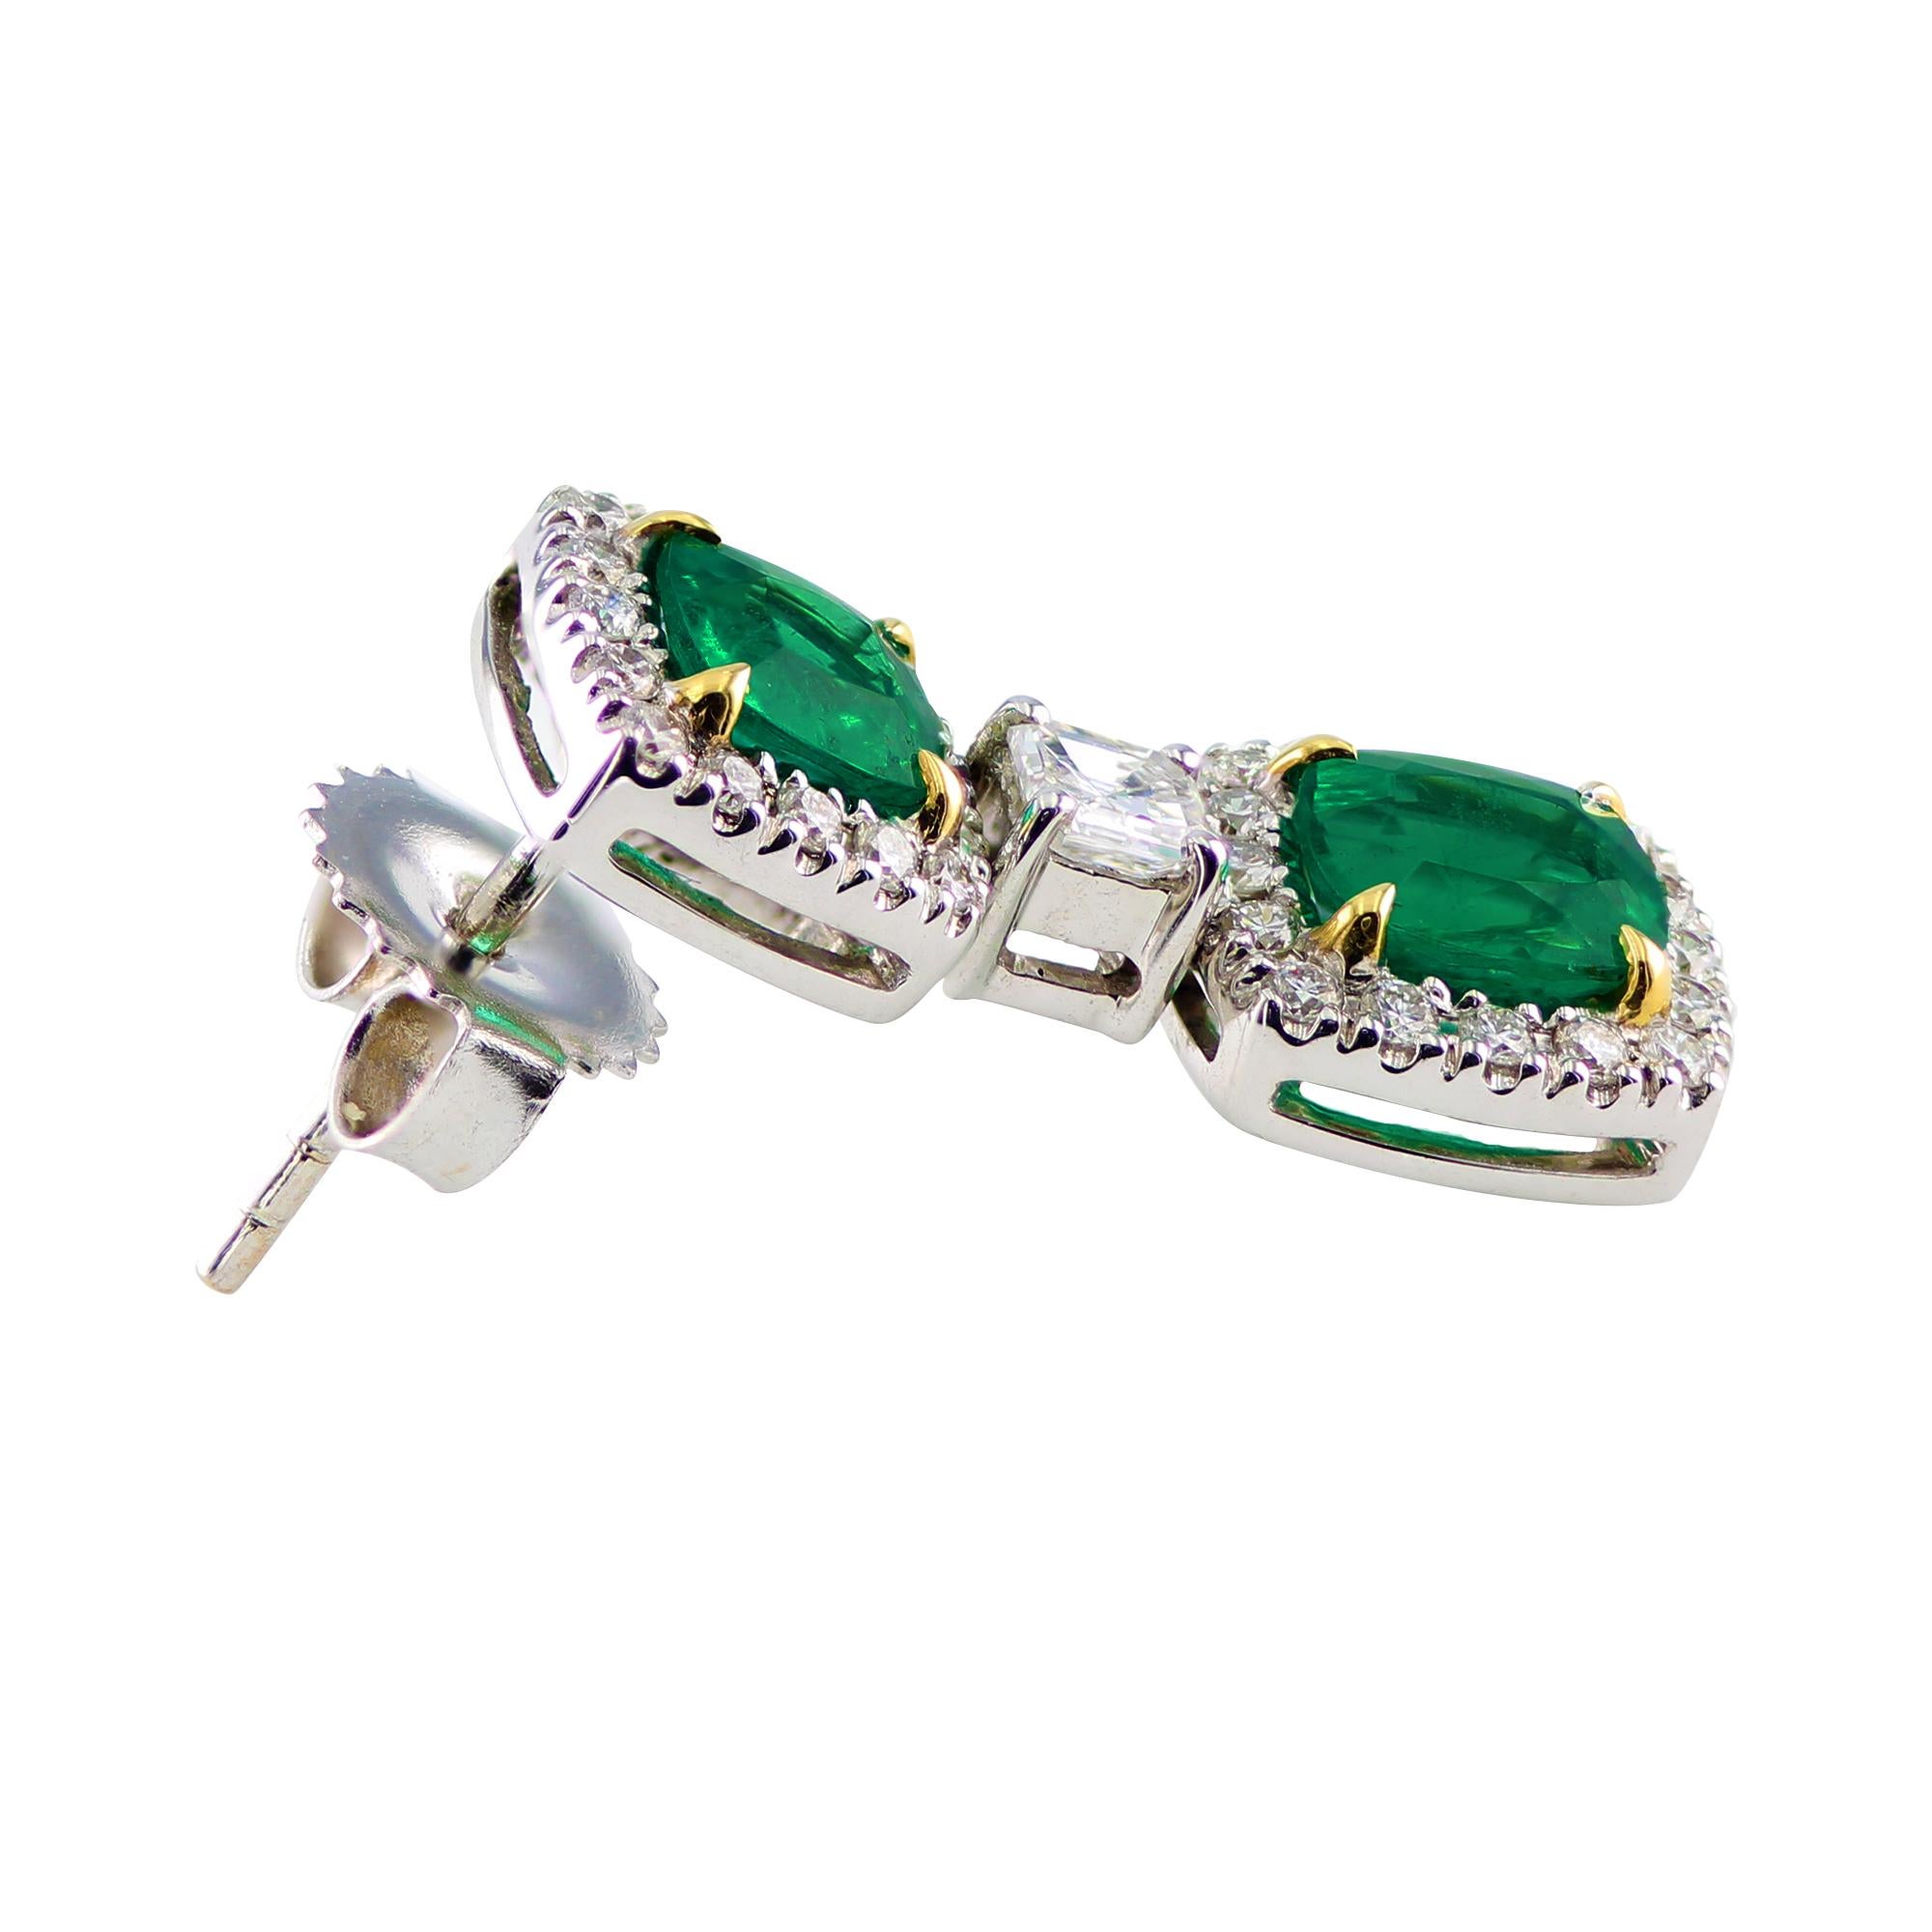 2.47 carat, cushion emerald earrings, separated by a 0.34 carat asscher cut diamond, accented by 0.55 carat round diamonds. 

Set in 18K White and Yellow gold. 

Beautiful and elegant drop earrings that may be worn for any occasion. A lovely gift